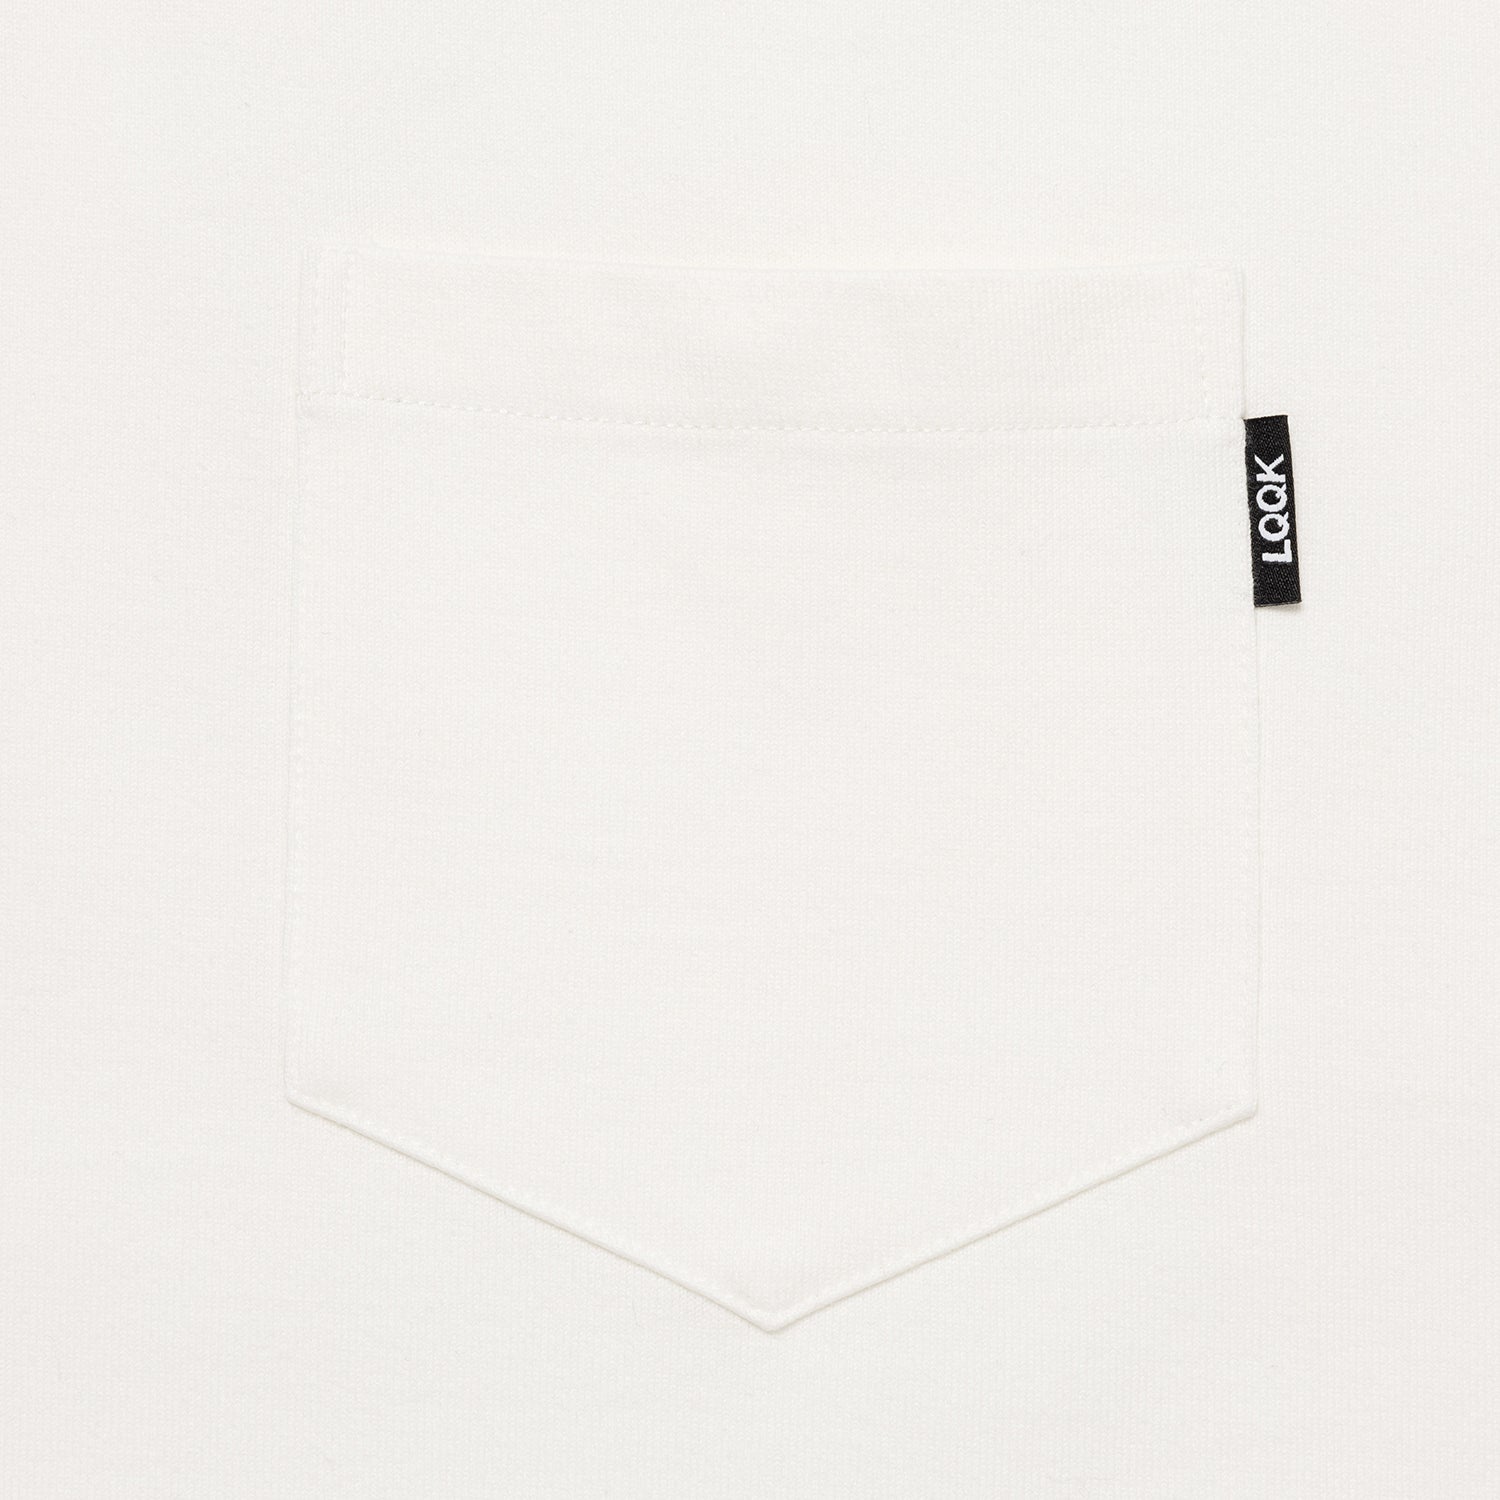 LQQK STUDIO｜L/S RUGBY WEIGHT POCKET TEE｜WHITE